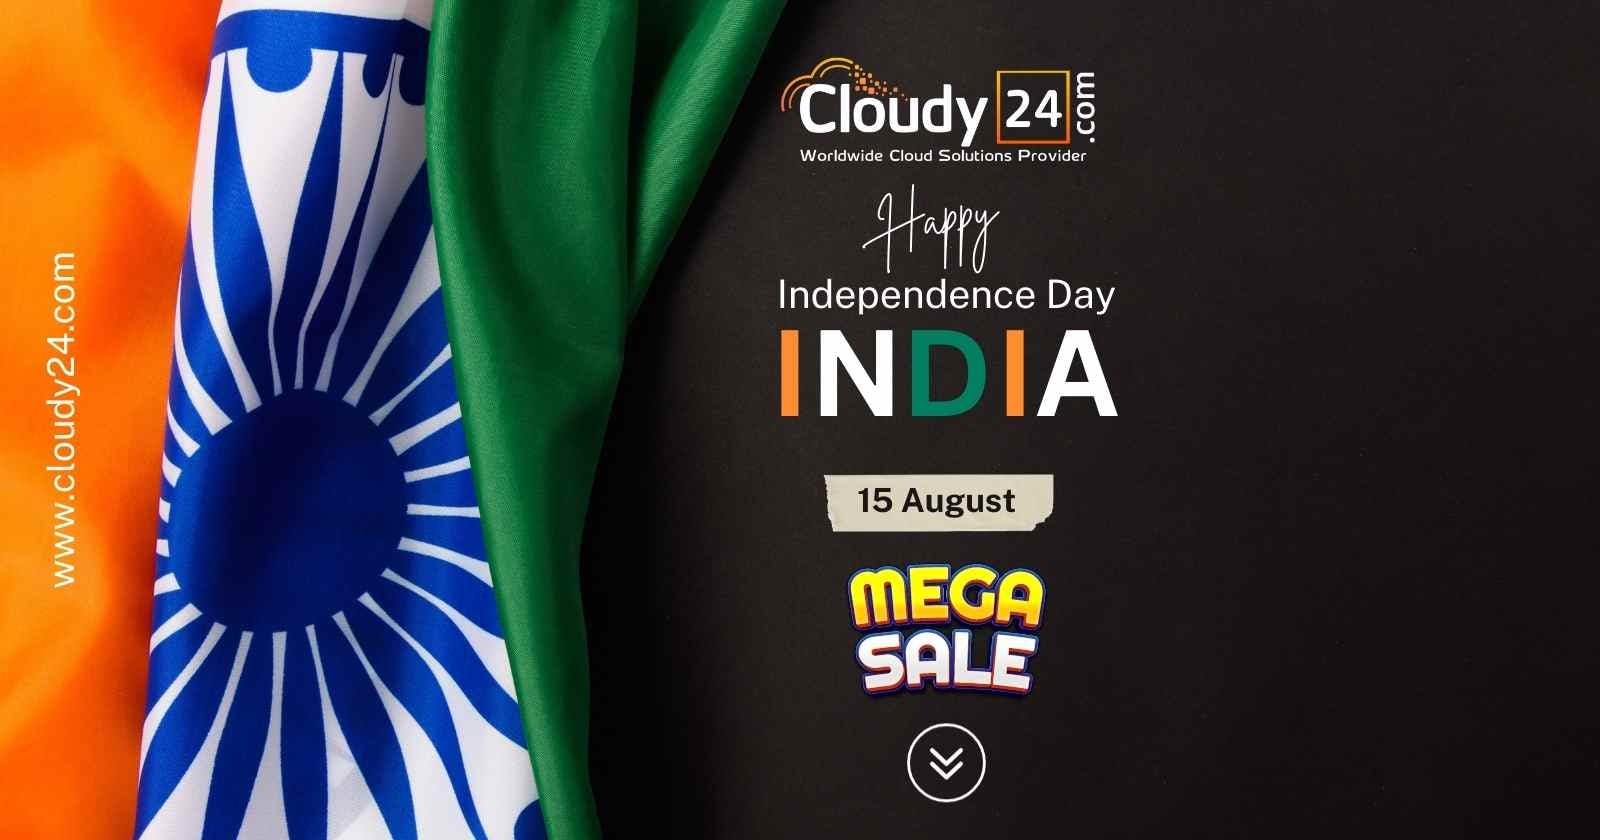 🎉🇮🇳 Celebrate Independence Day with Cloudy24 Web Hosting Services! 🇮🇳🎉